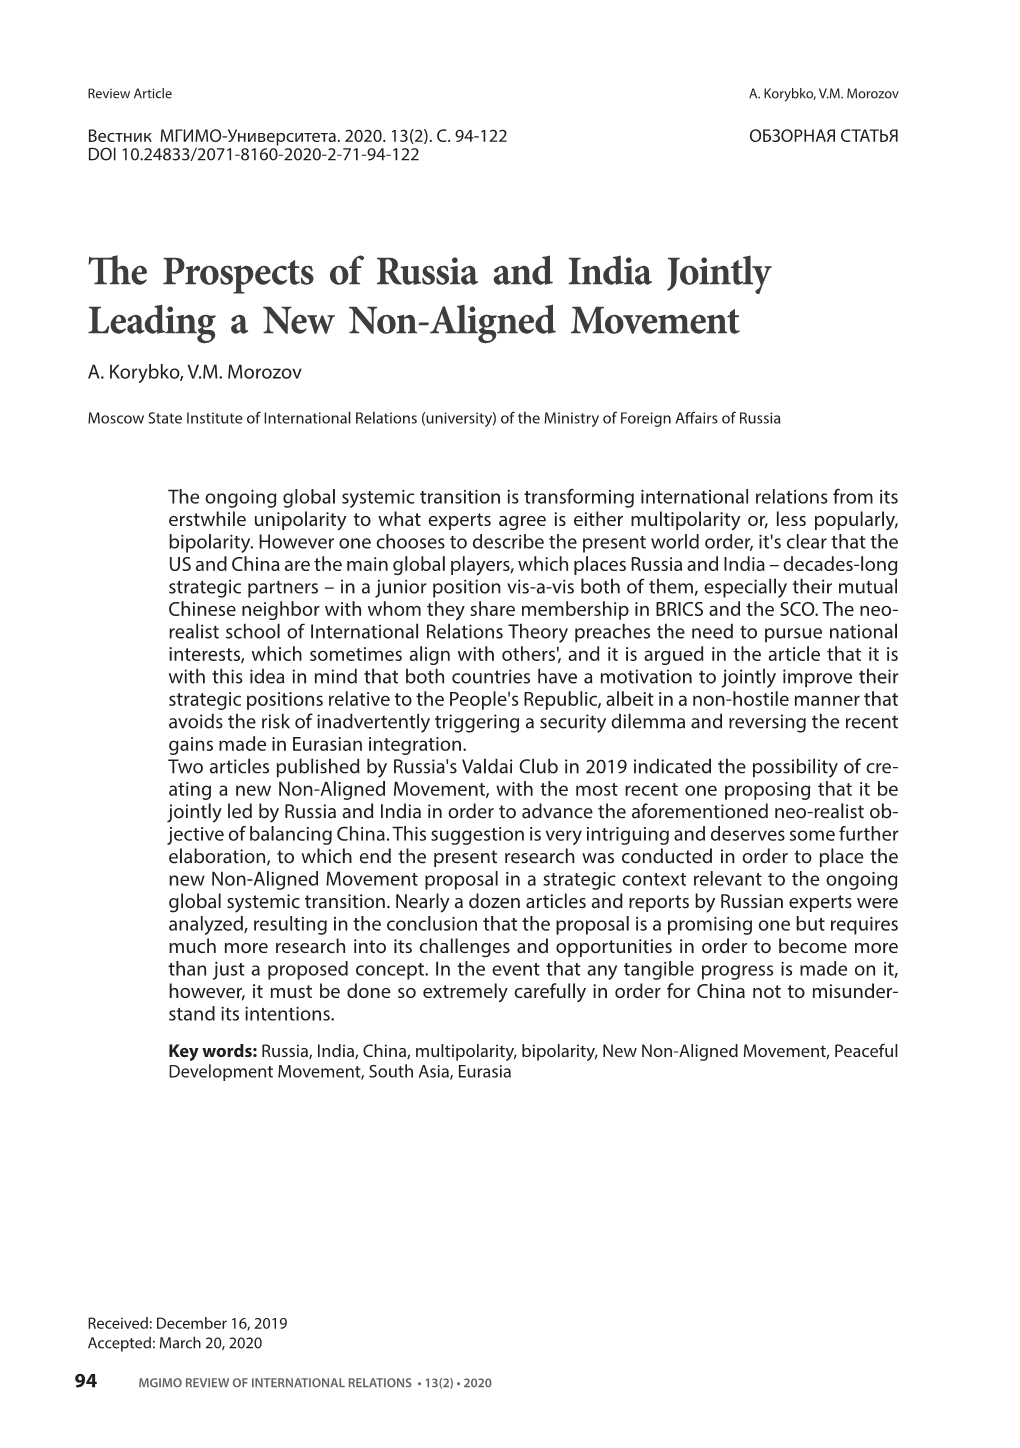 The Prospects of Russia and India Jointly Leading a New Non-Aligned Movement A